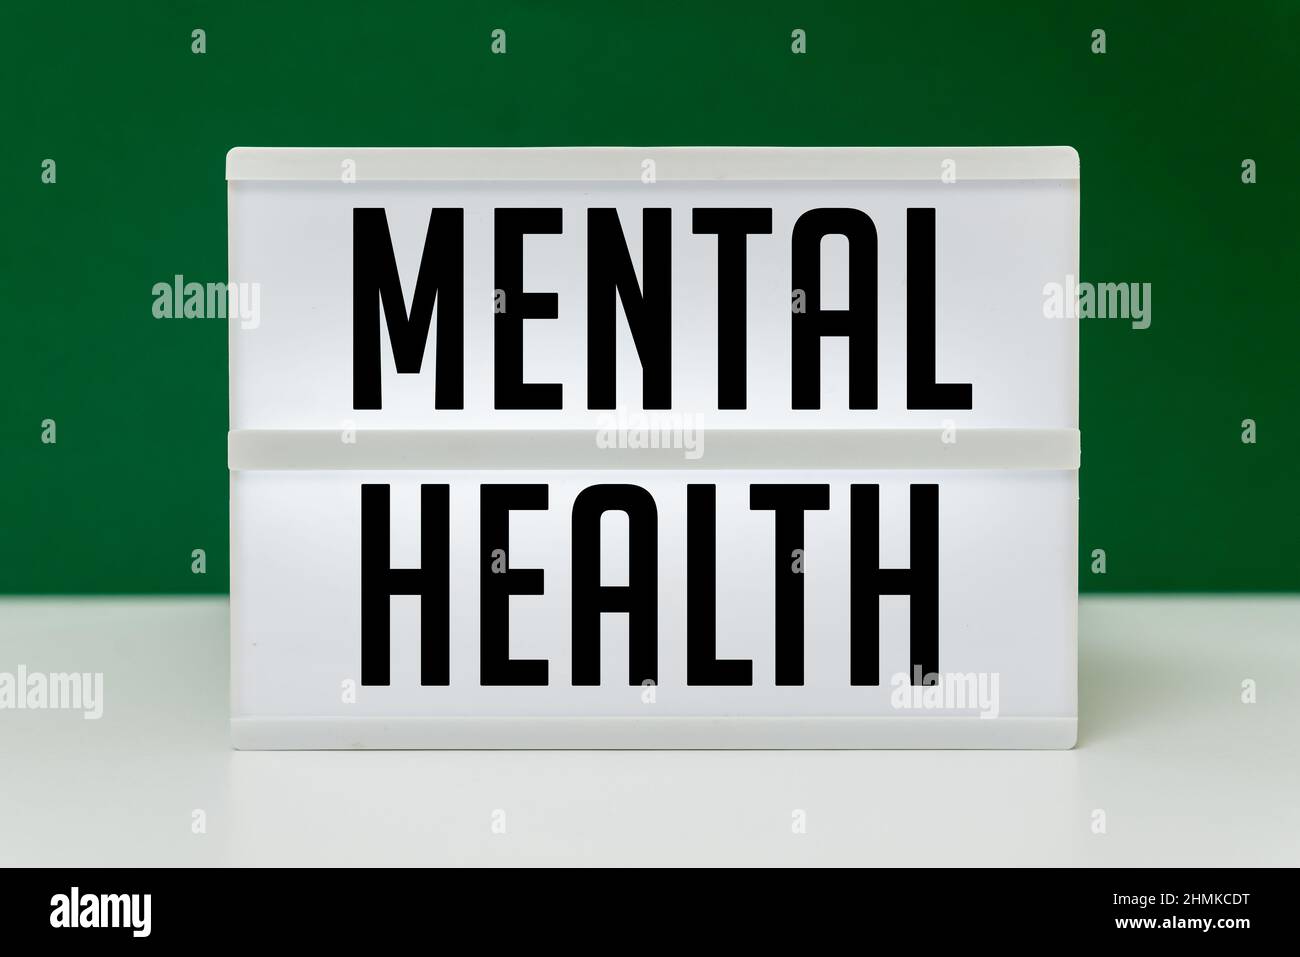 Mental health text on green background Stock Photo